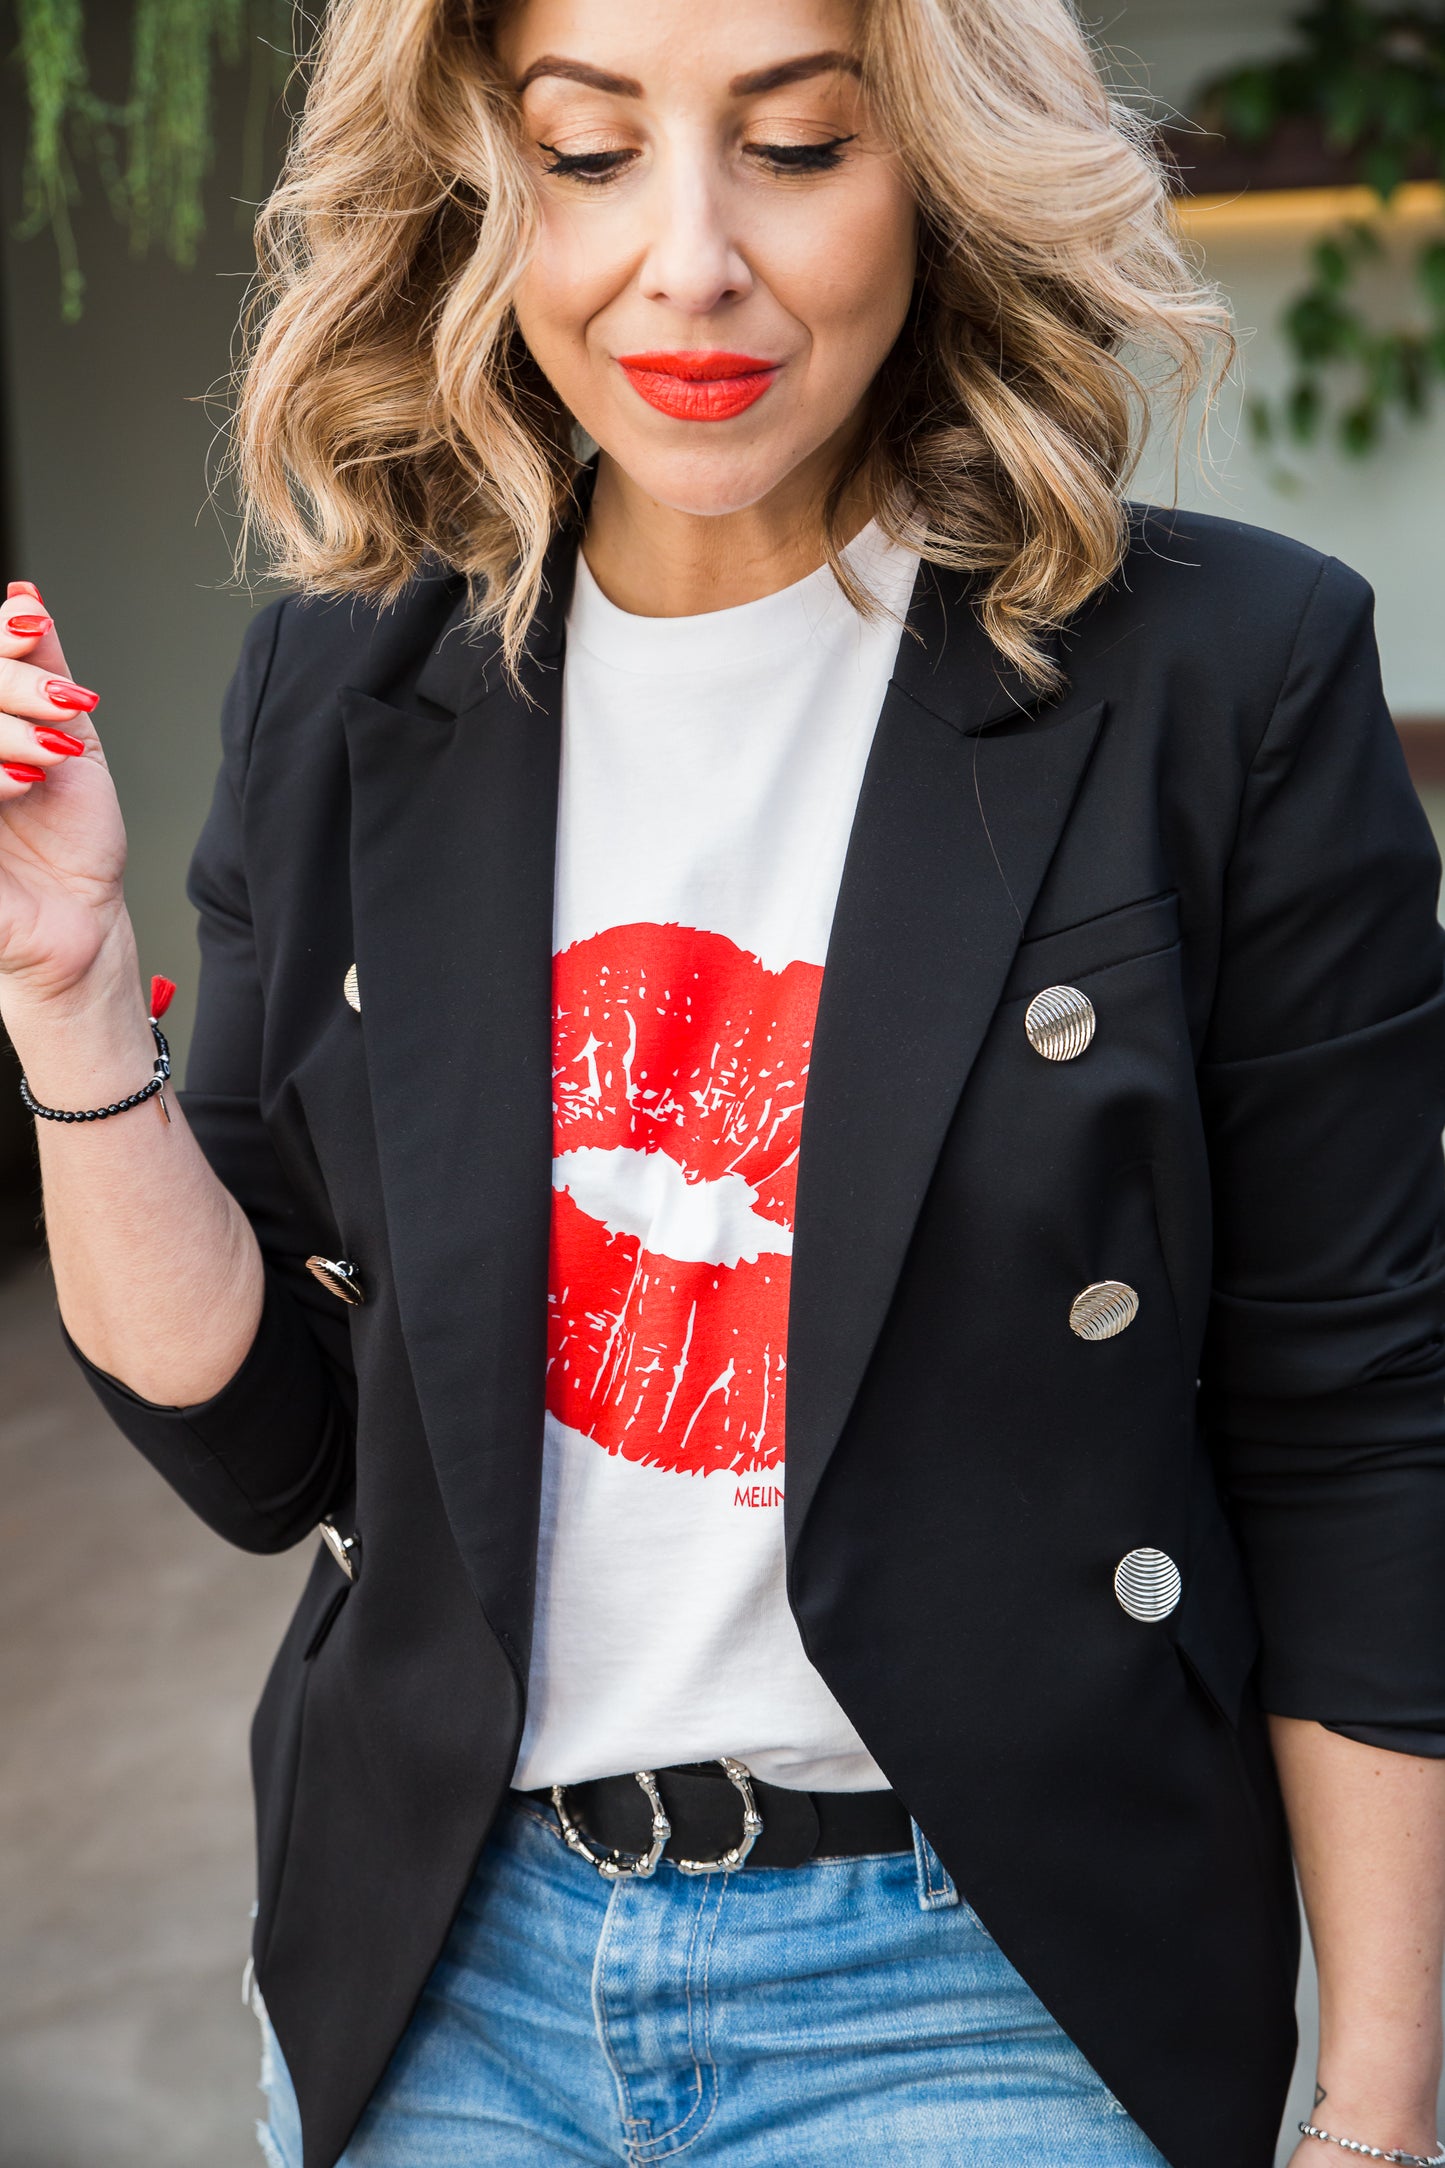 POP YOUR LIPS TEE - white with red lips